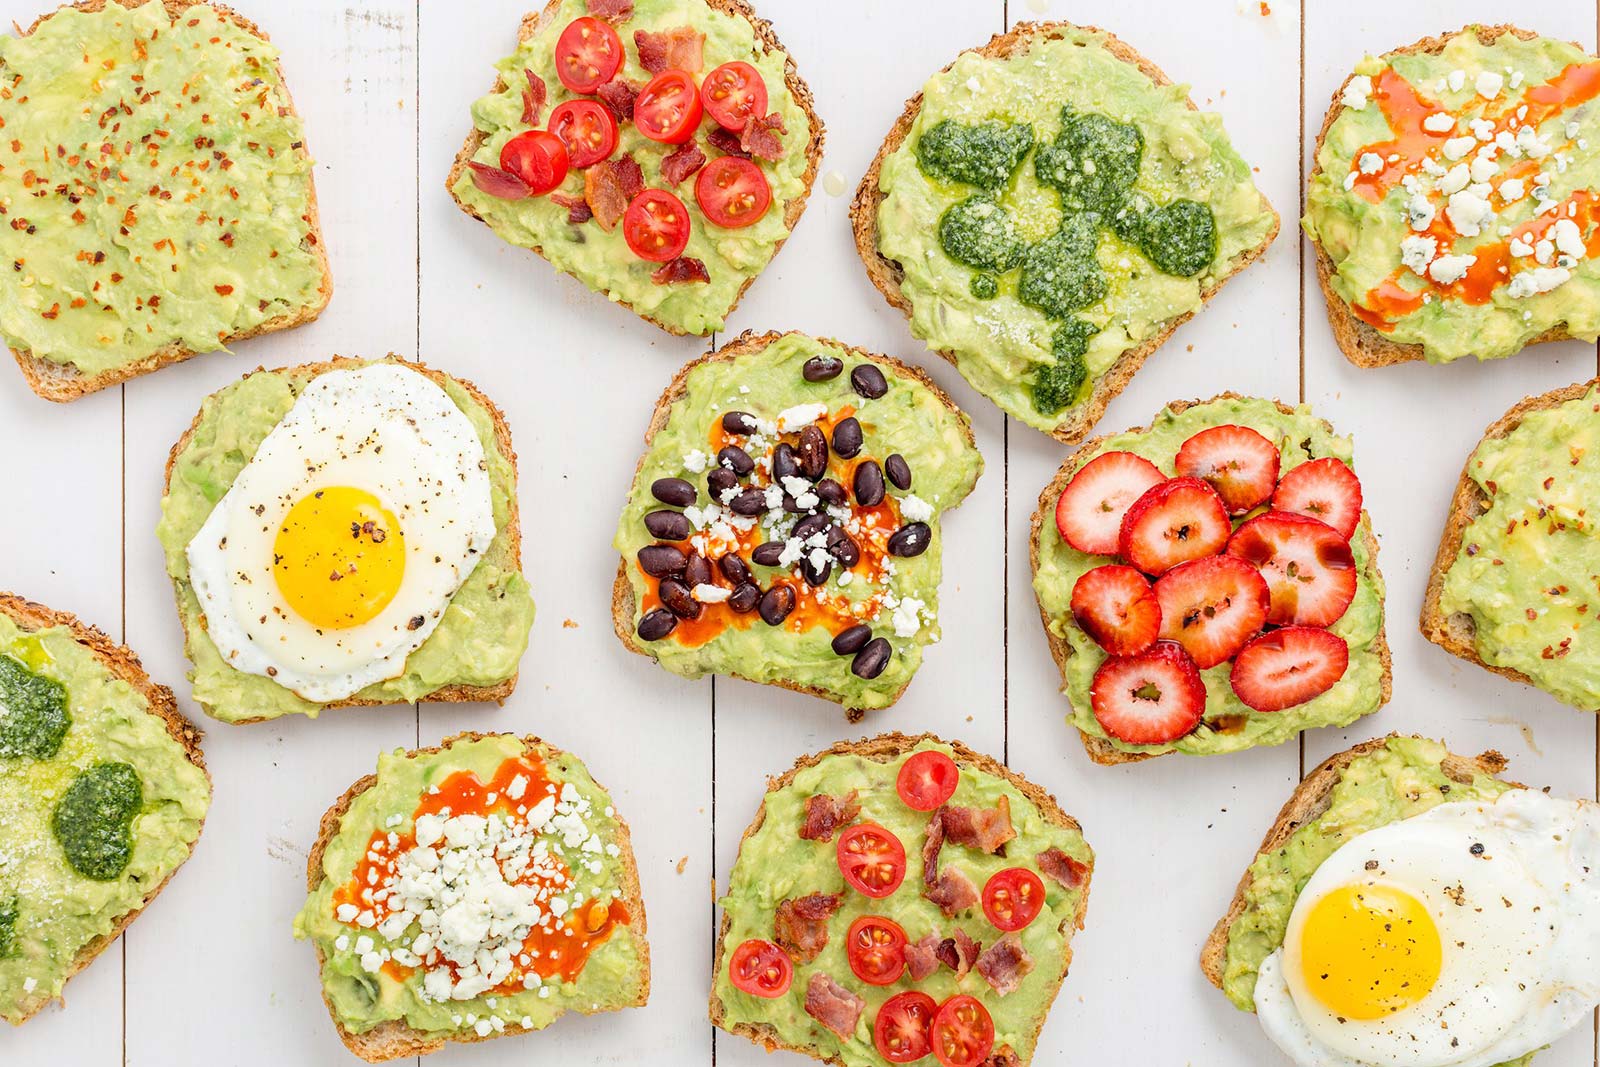 Say “Yum” Or “Yuck” to These Trendy Foods to Find Out What People Hate Most About You Avocado toast